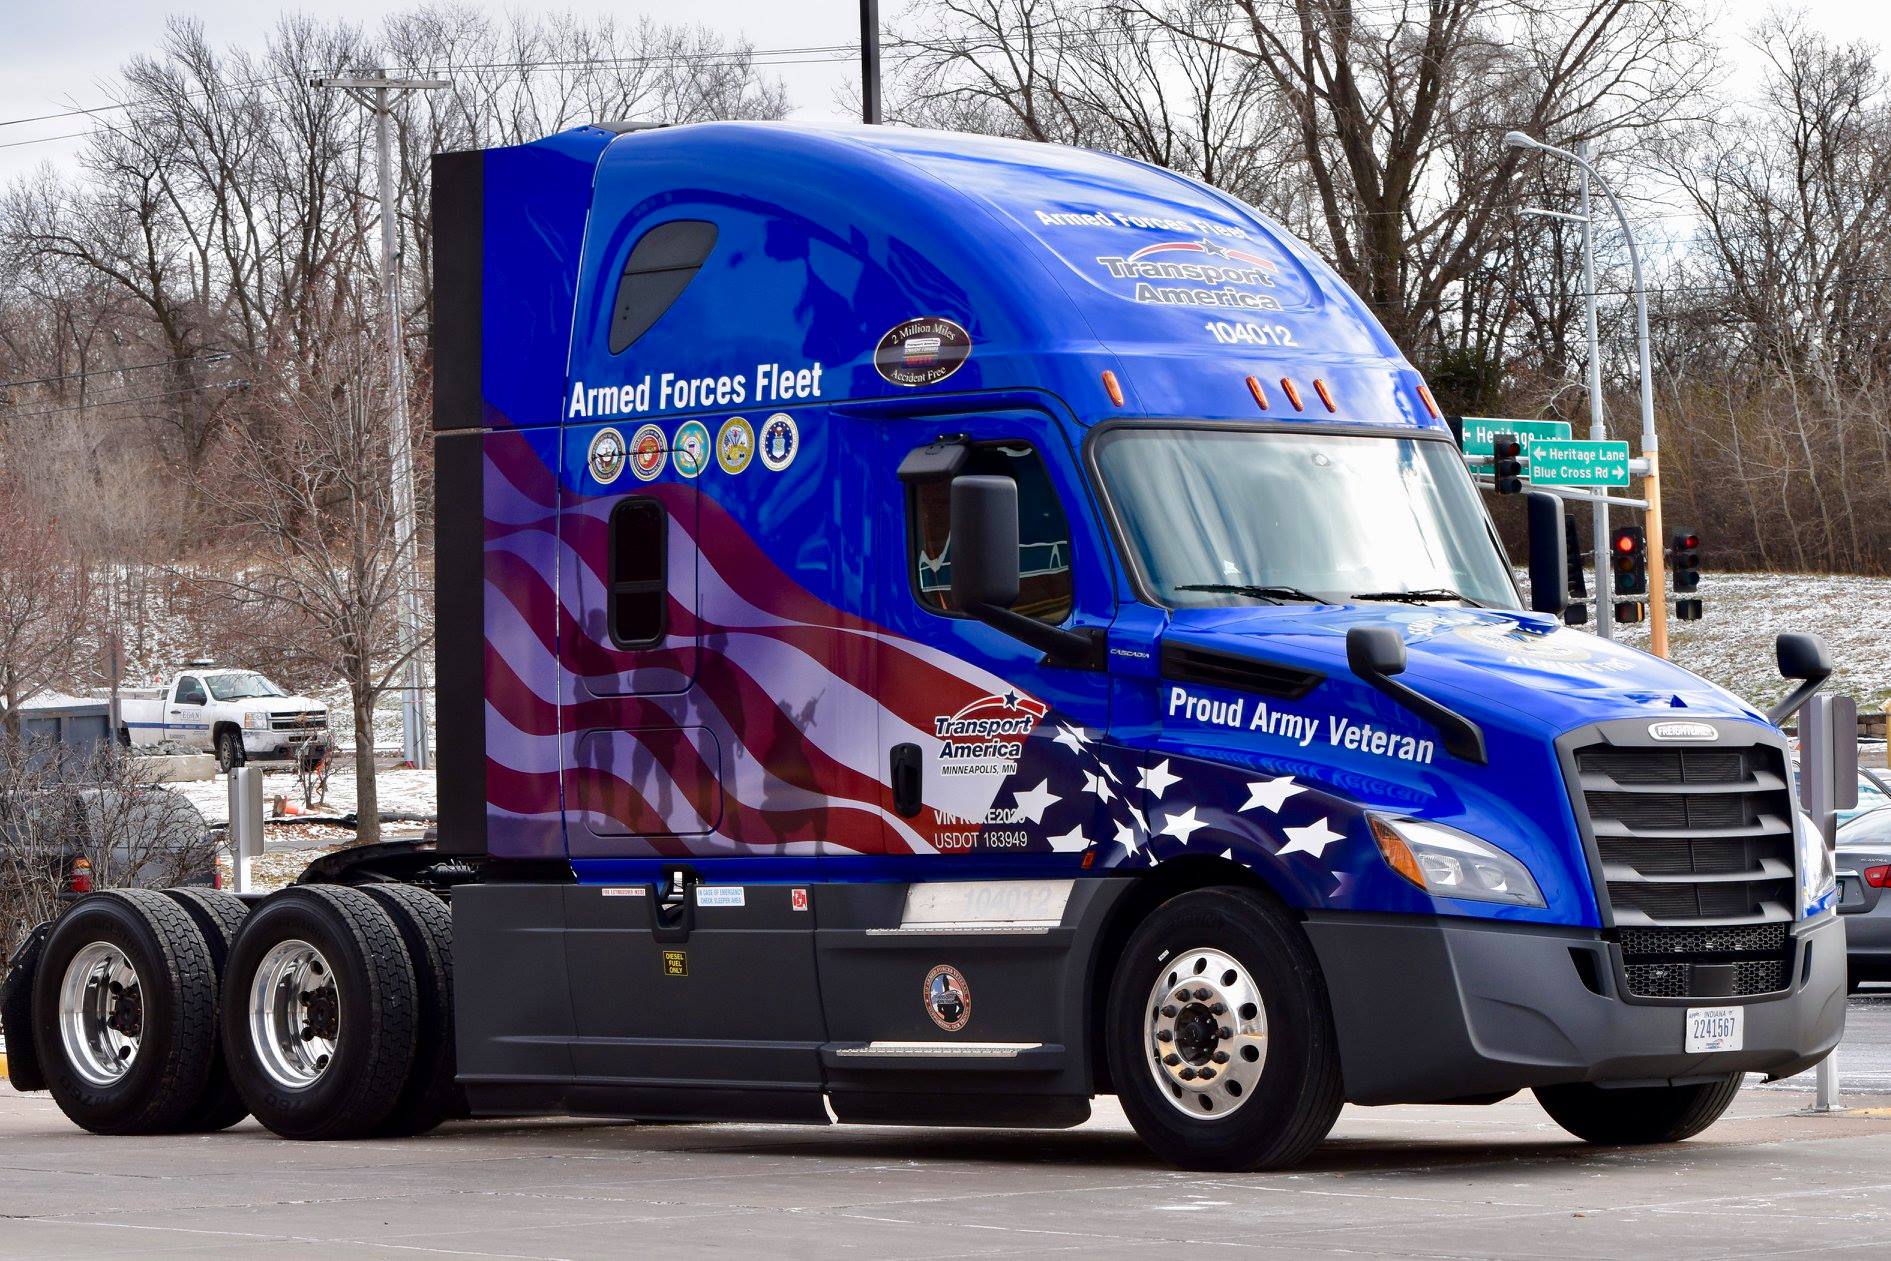 Trucking company honors driver with custom-designed truck to commemorate military service